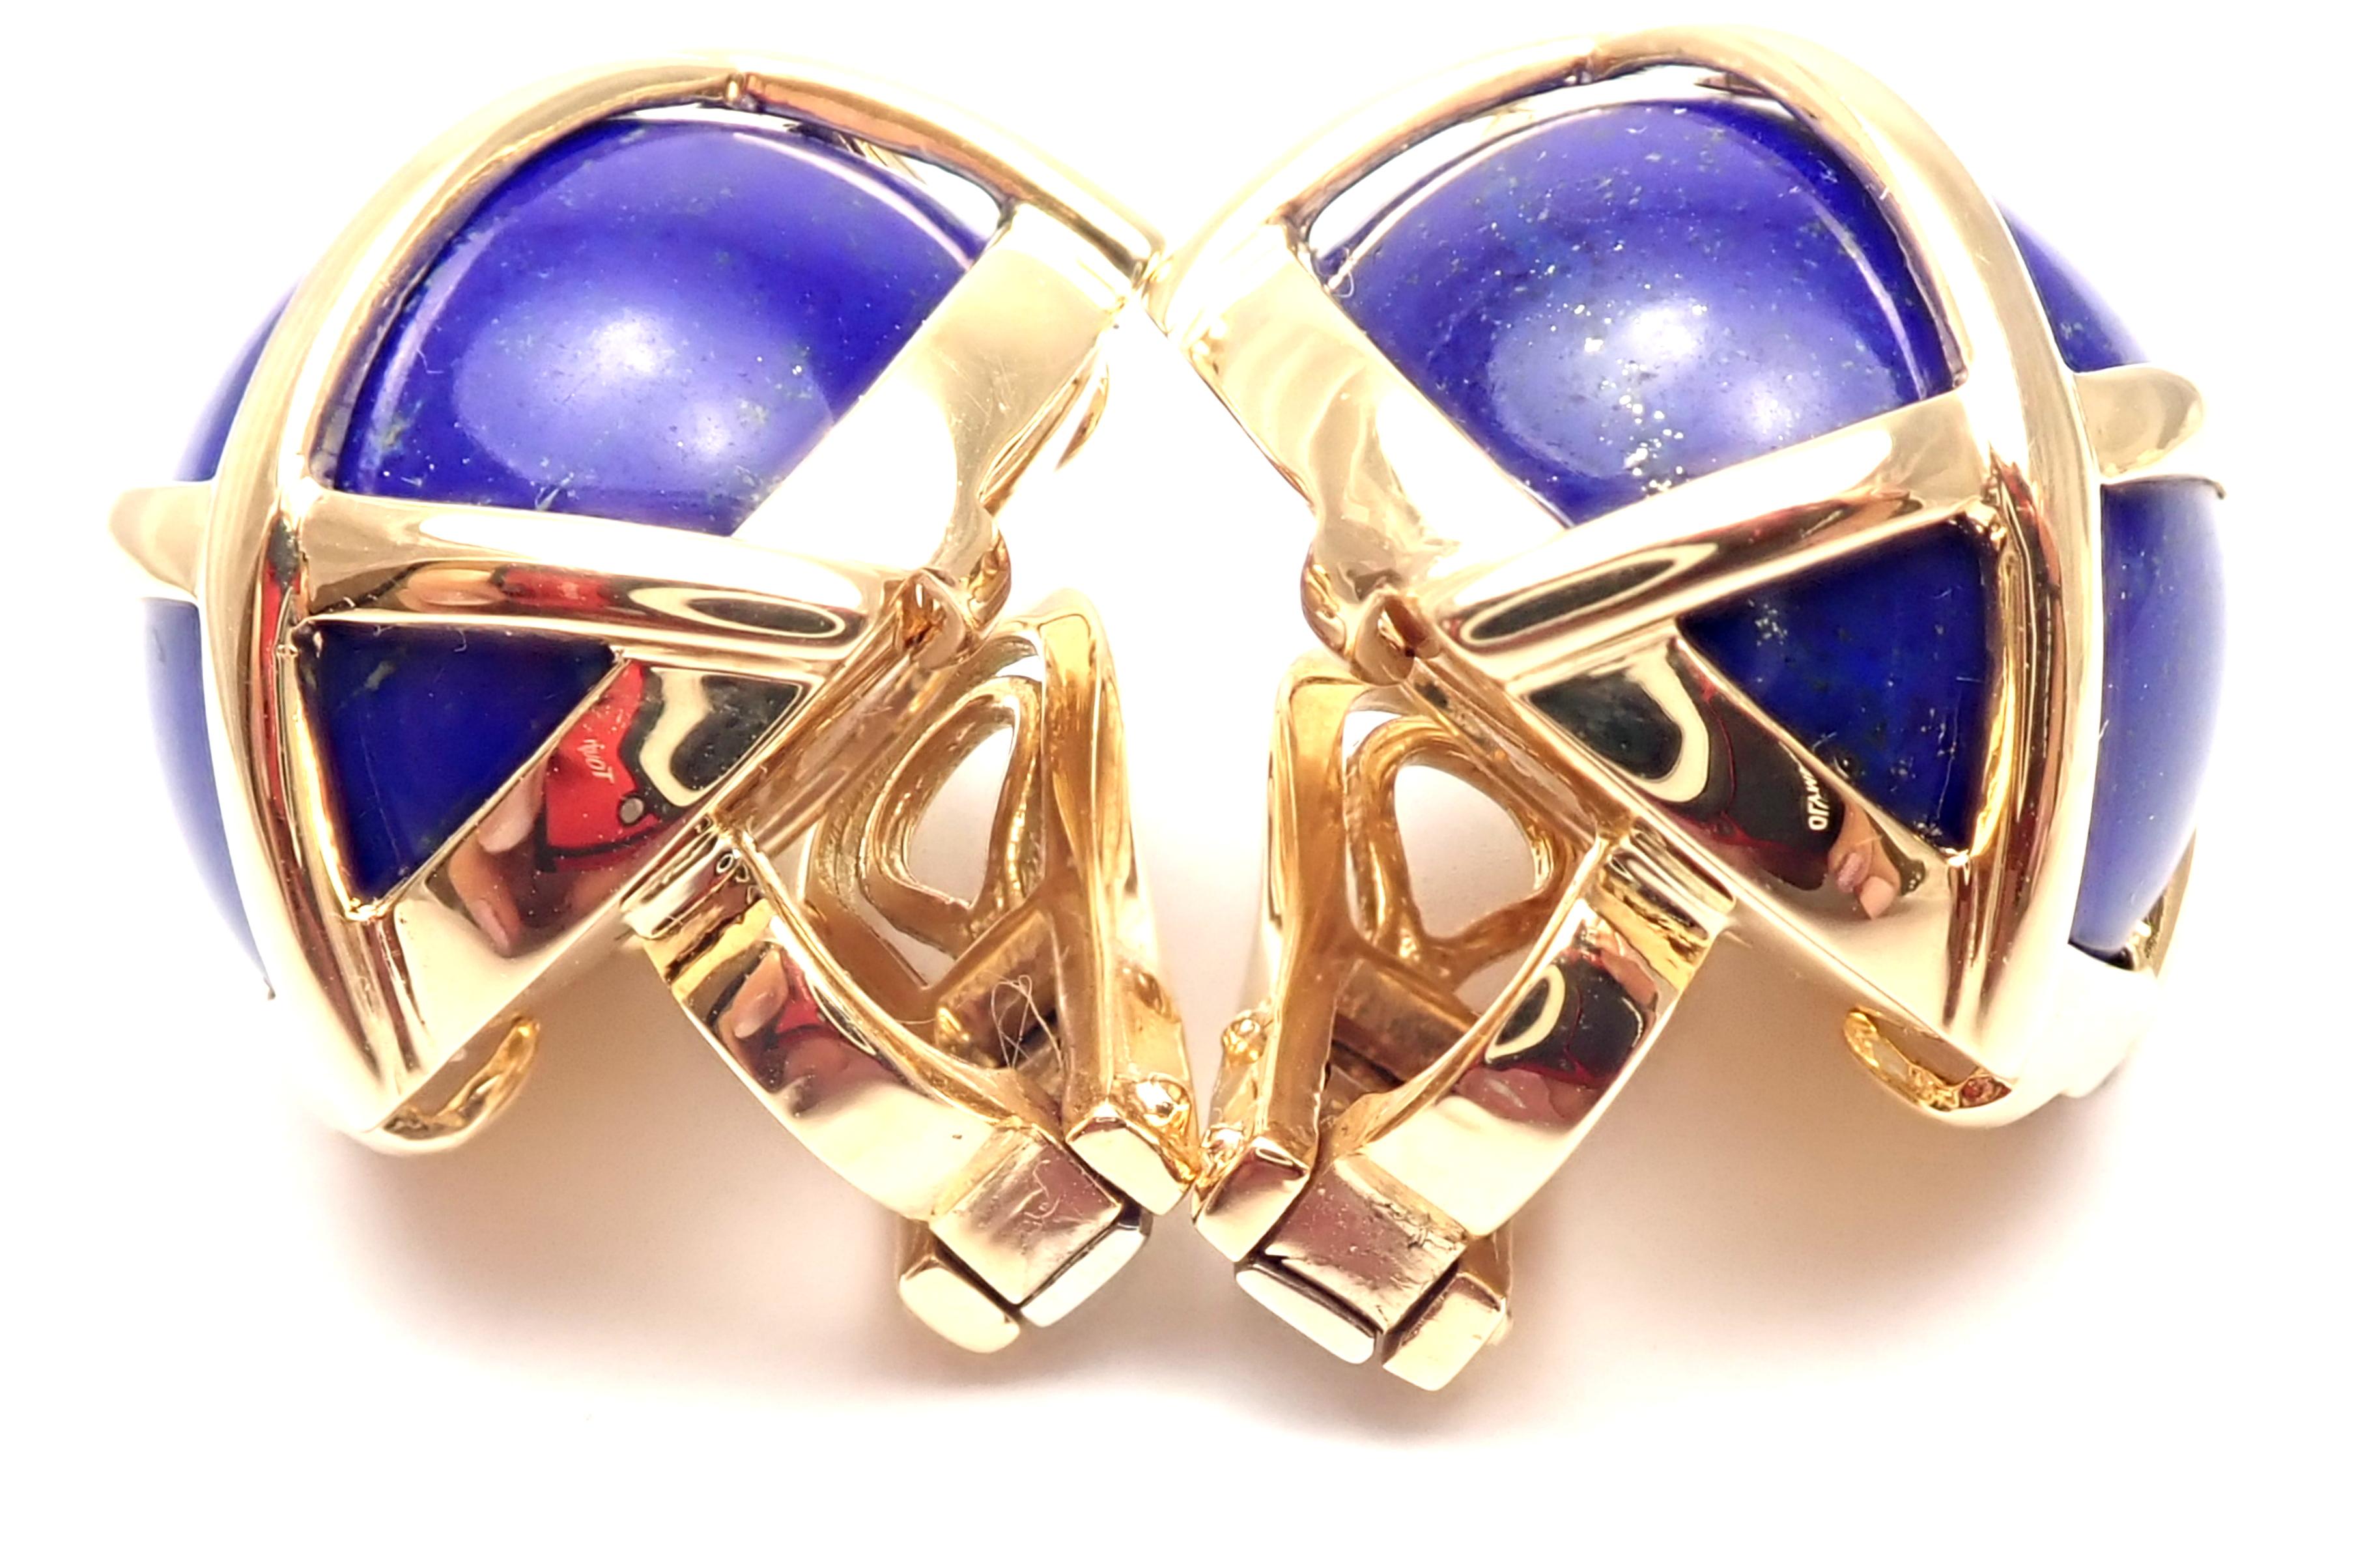 18k Yellow Gold Lapis Lazuli Caged Earrings by Verdura. 
With 2 lapis lazuli stones 22mm.
These earrings are for non pierced ears.
Details:
Measurements: 22mm x 15mm
Weight: 29.8 grams
Stamped Hallmarks: VERDURA, 750, 5009
*Free Shipping within the